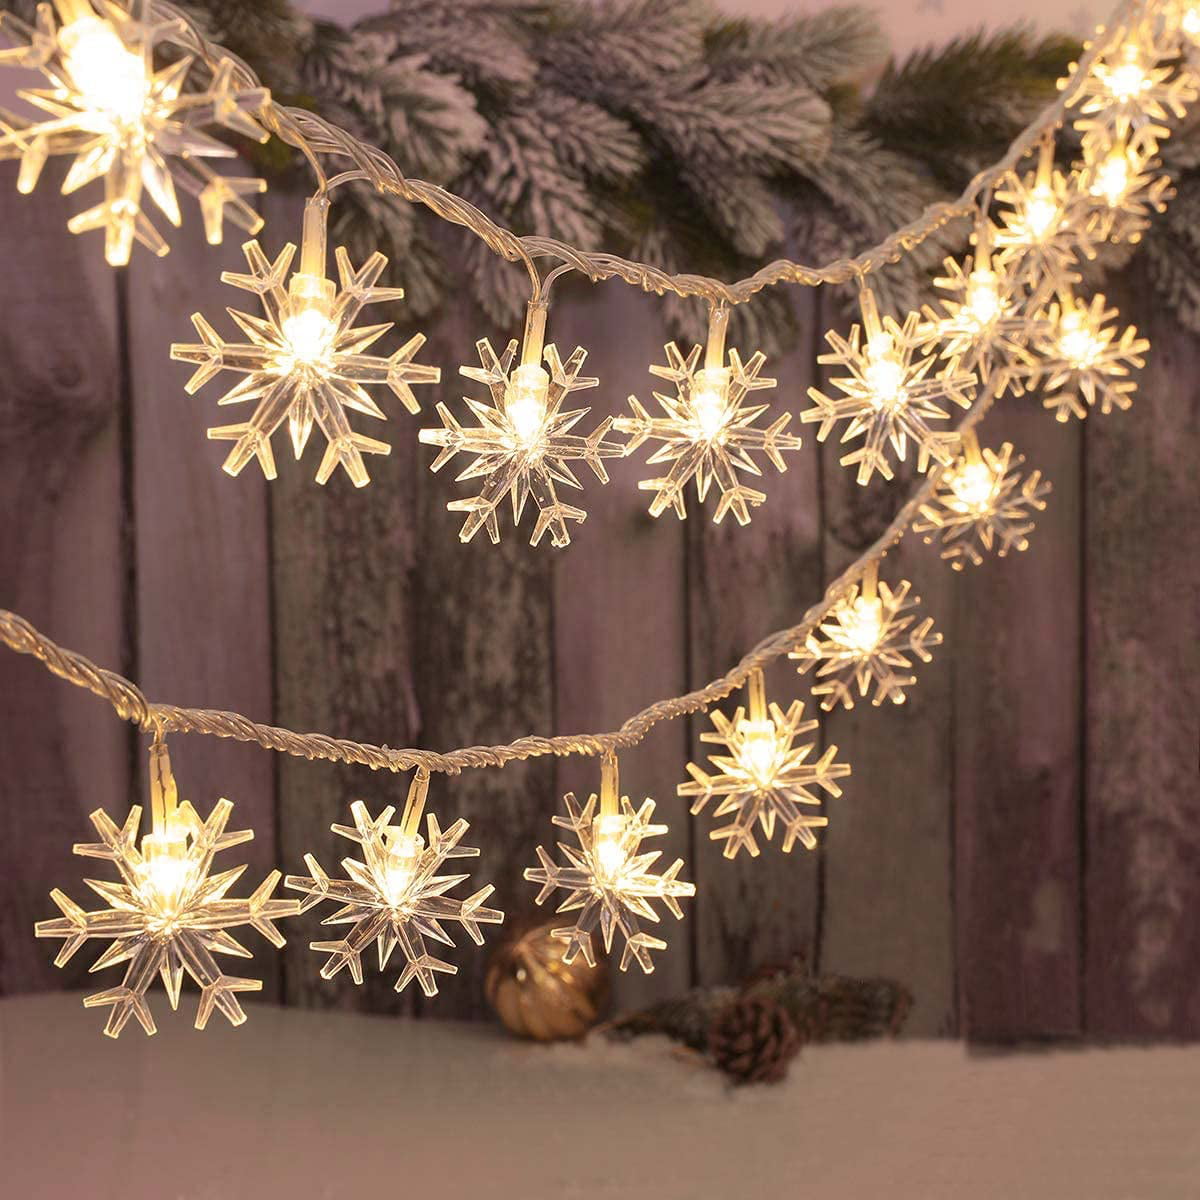 New Xmas Christmas White LED Starburst Fairy Light With Great Decorative Effect 